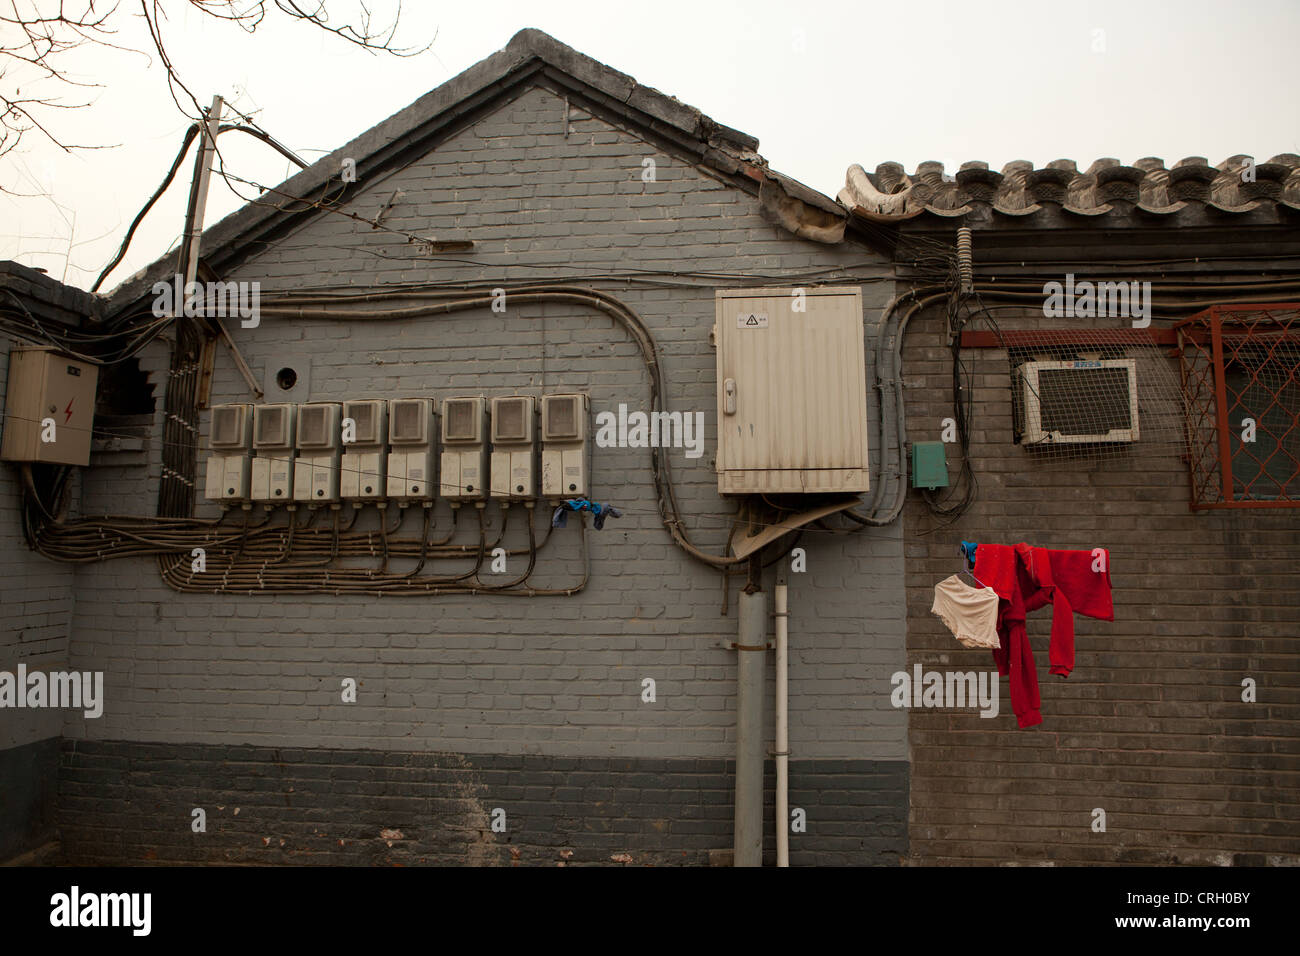 Electric meter boxes on exterior wall of a building, Hutong, Beijing, China, Asia Stock Photo